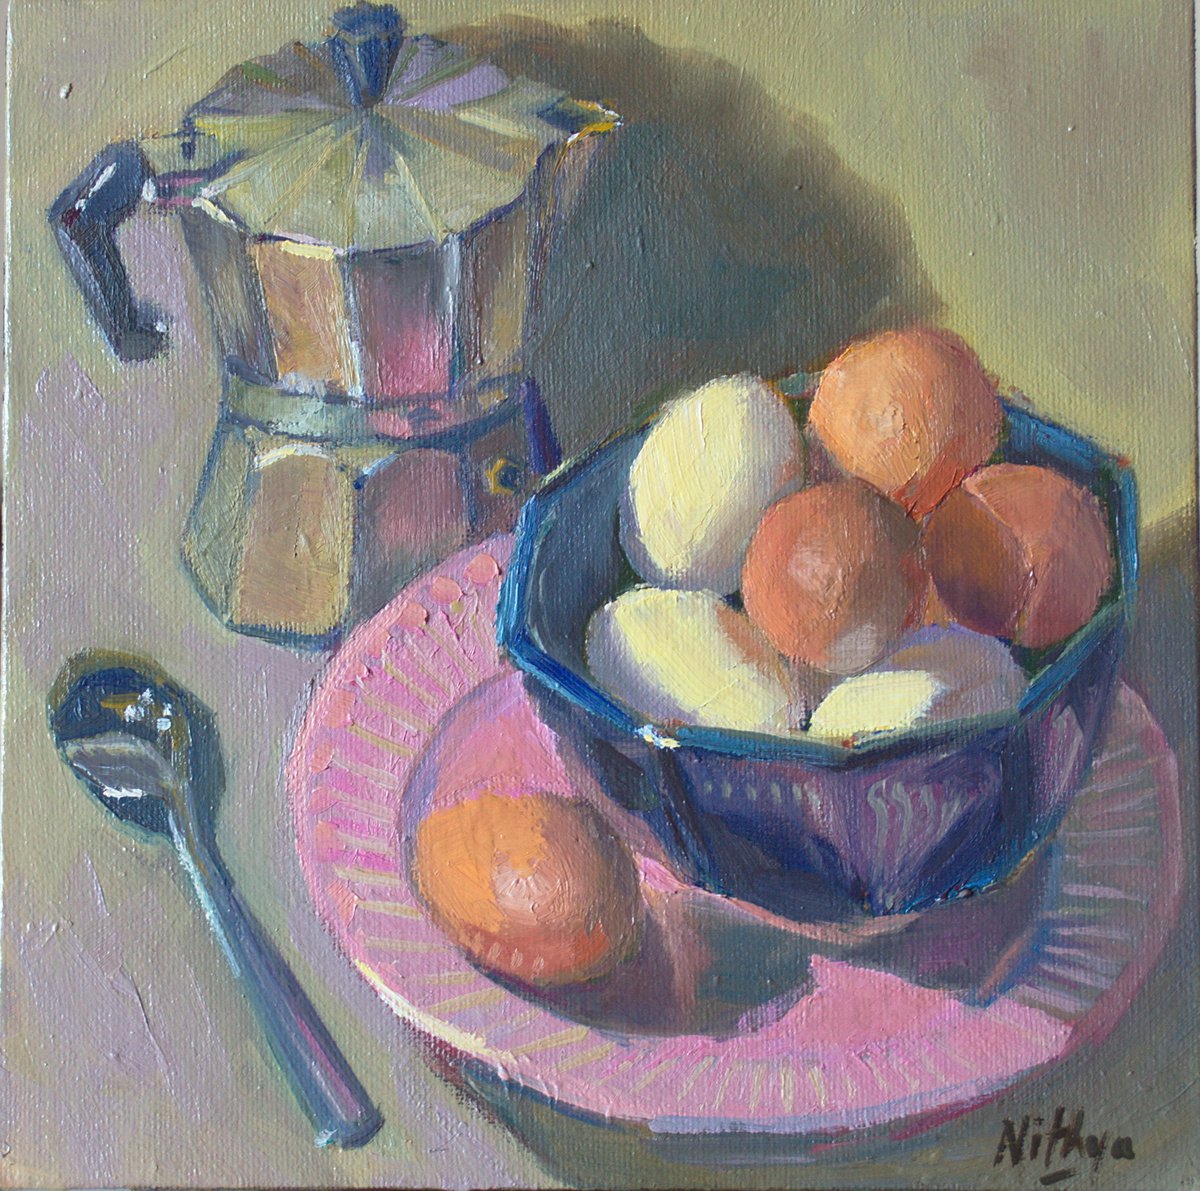 Kitchen Decor - Eggs in a Bowl - Small Oil painting, home decor by Nithya Swaminathan